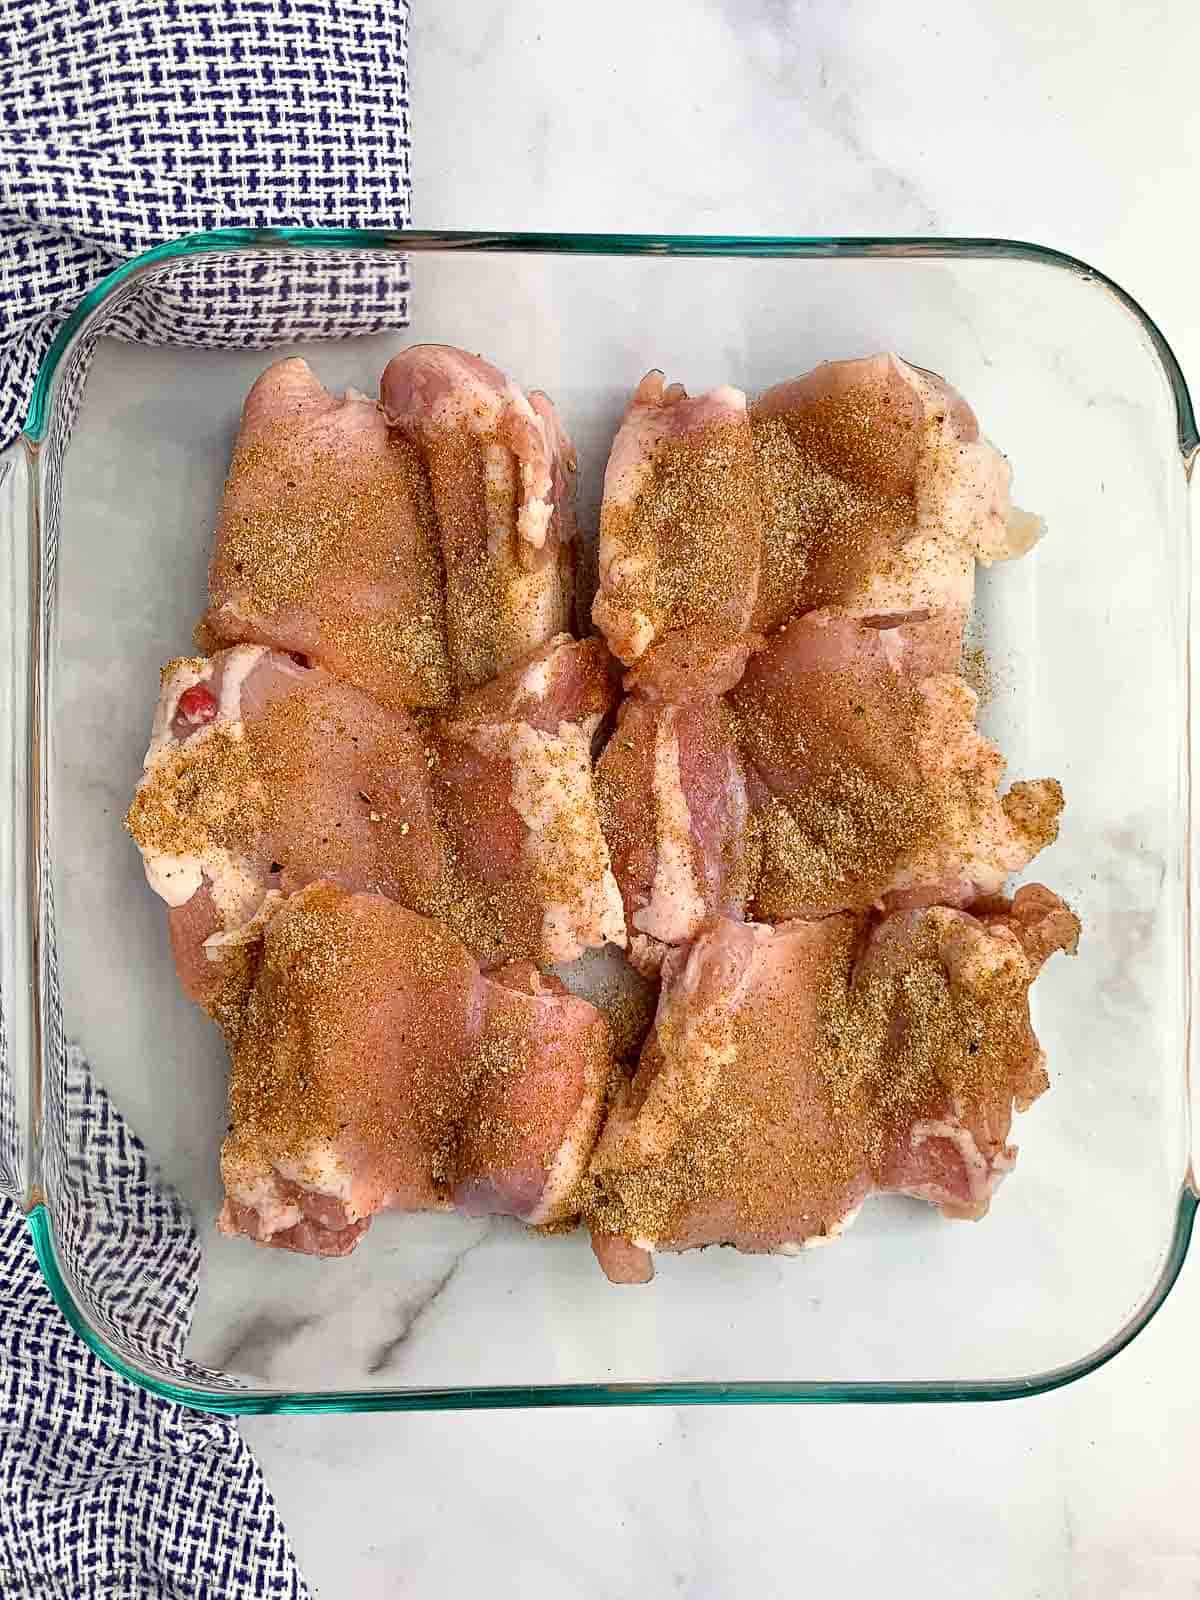 Chicken thighs sprinkled with spices.